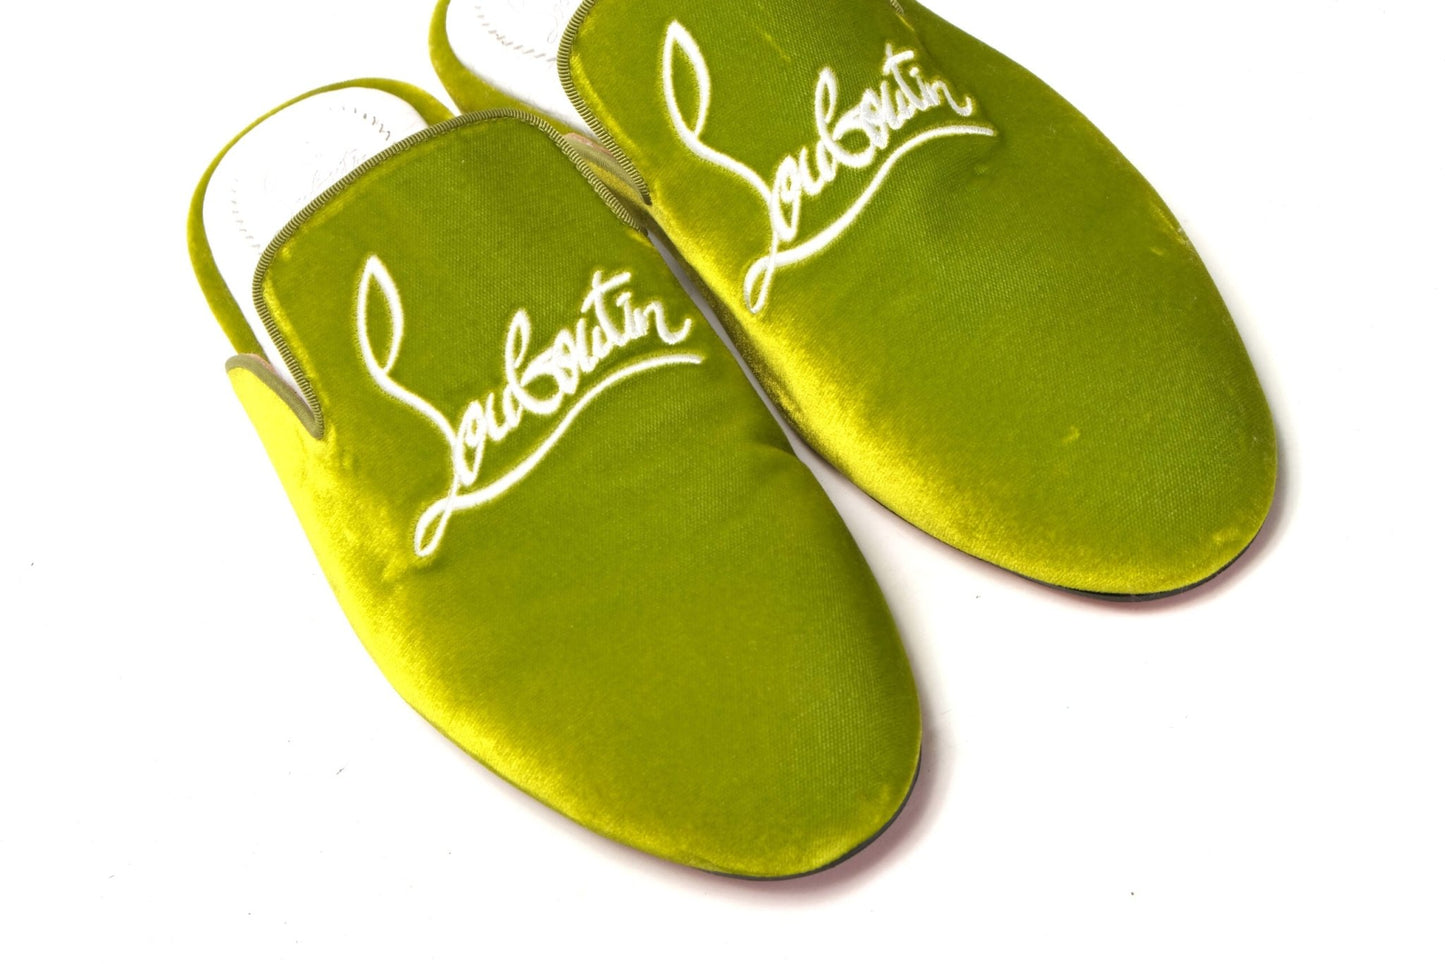 Christian Louboutin Bourgeon Lime Navy Coolito Flat Shoes